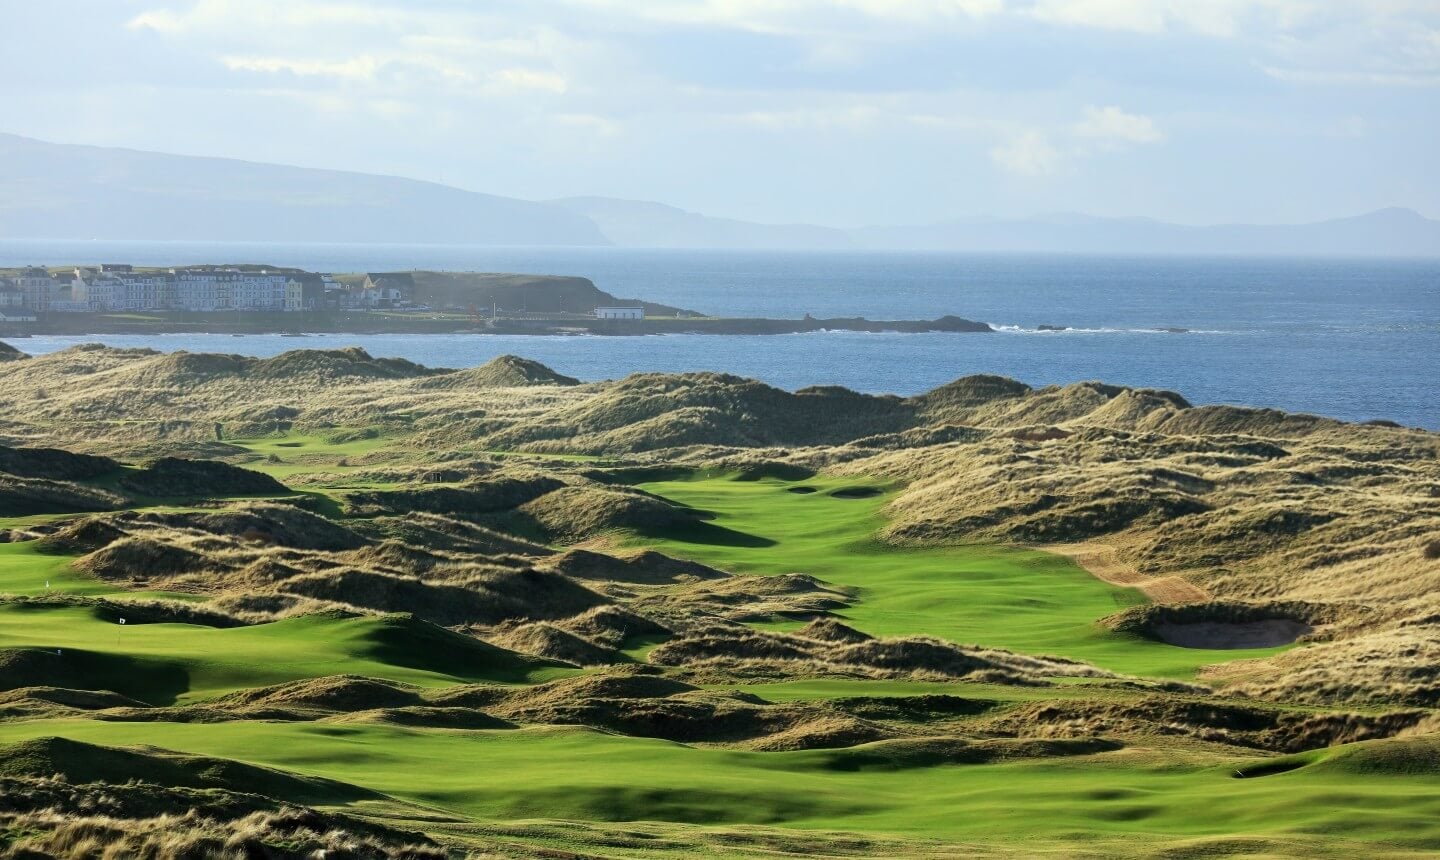 Image depicting the 7th hole and distant township of Portrush at Royal Portrush Dunluce Golf Course, Portrush, County Antrim, Northern Ireland